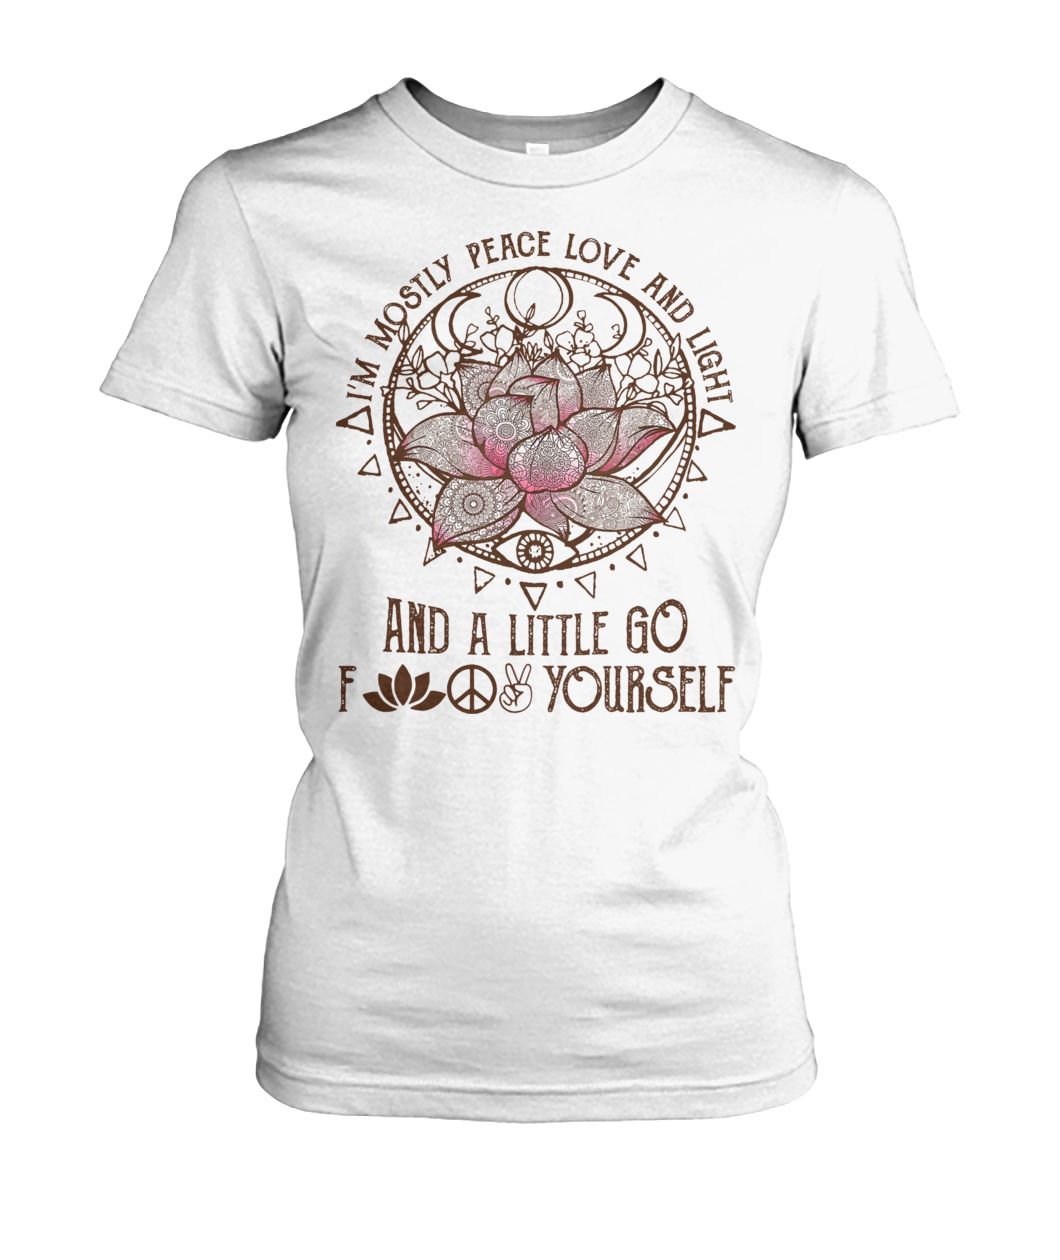 Lotus flower I'm mostly peace love and light and a little yoga women's crew tee